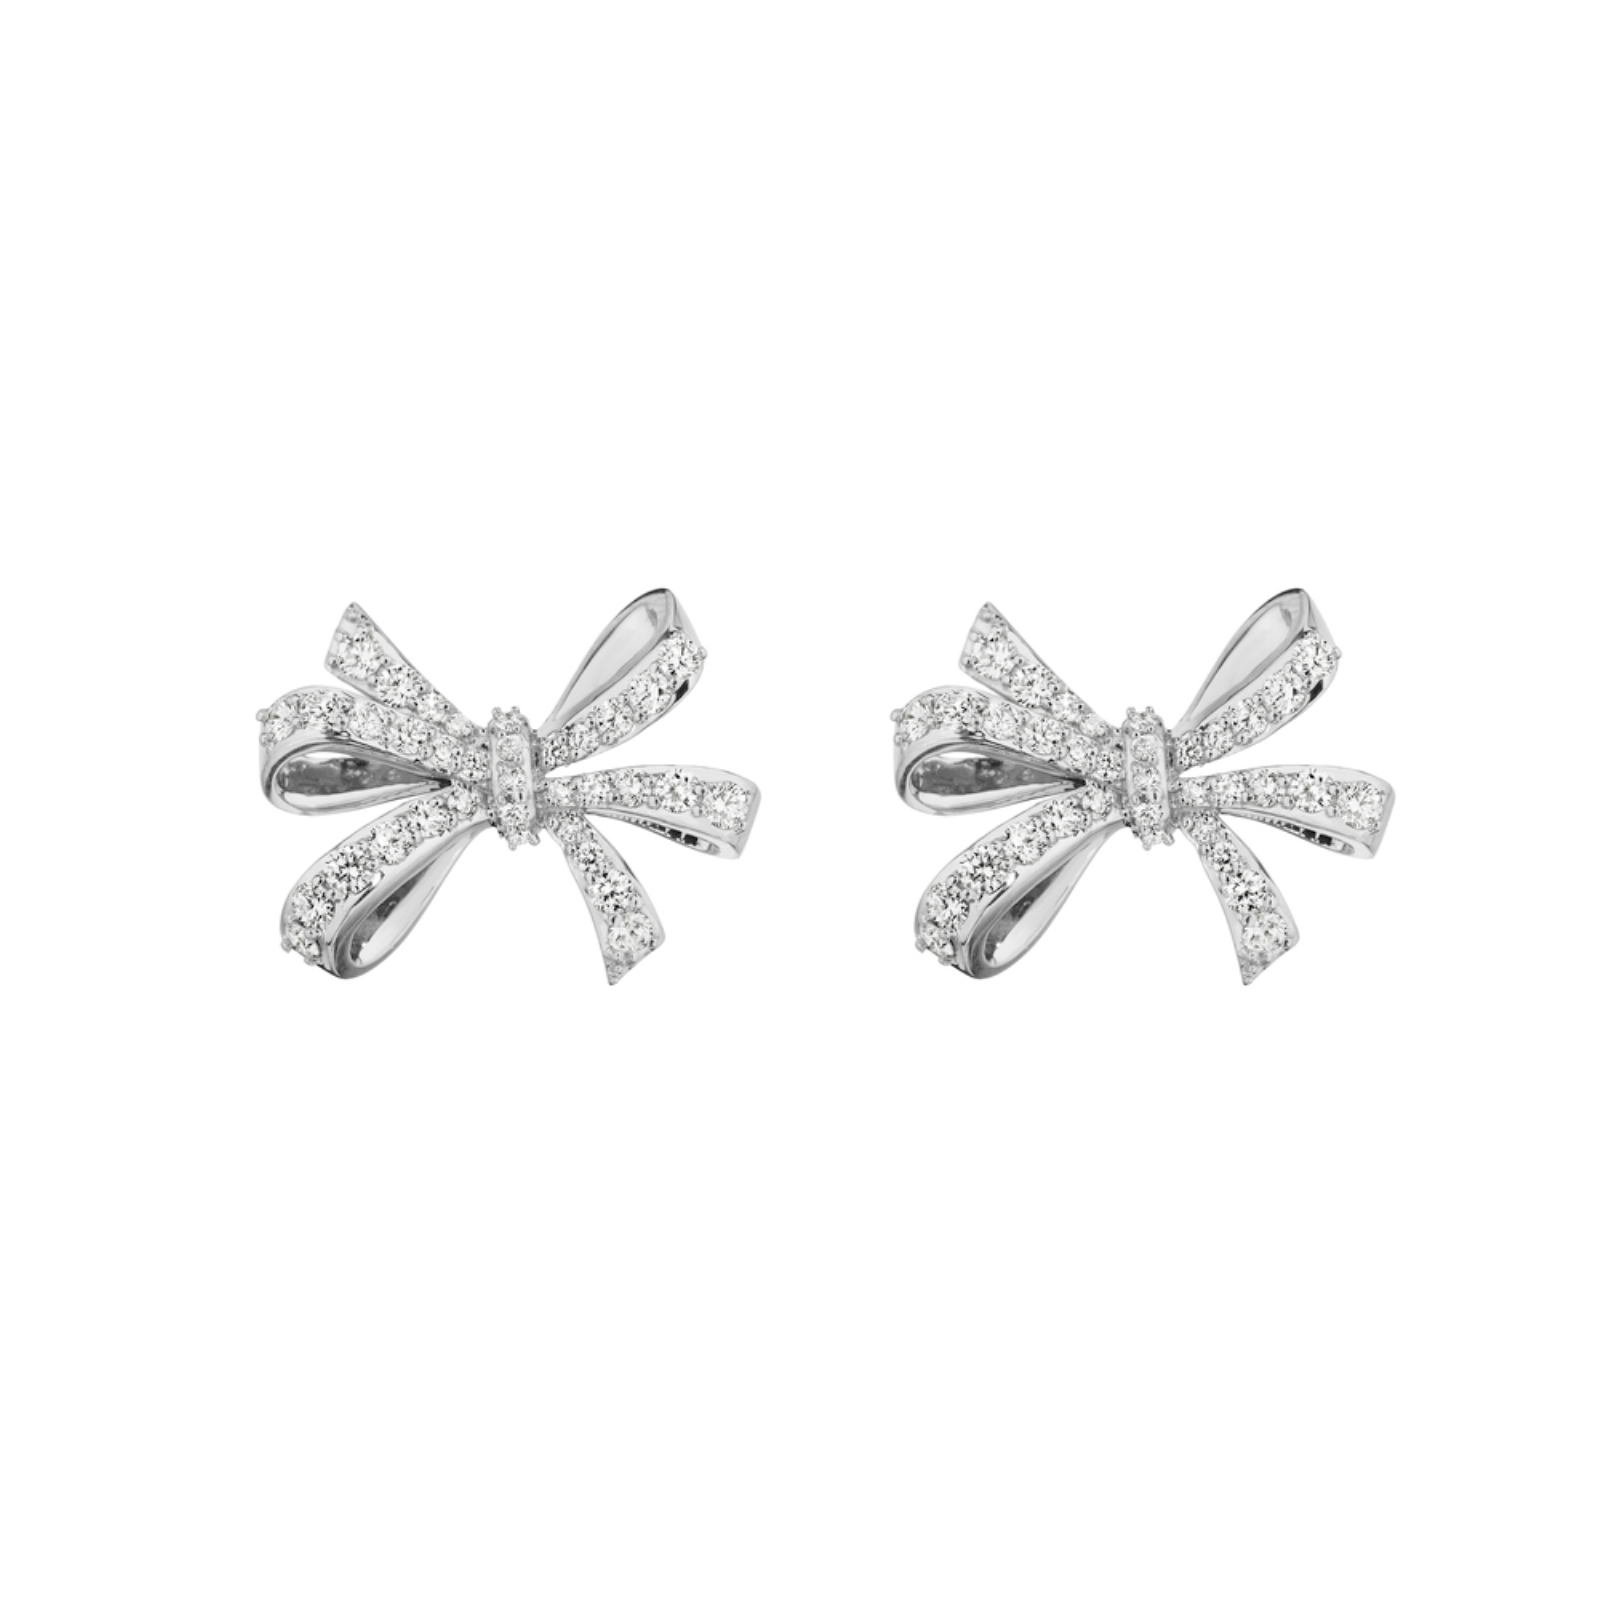 White Gold and Diamond Bow Stud Earrings